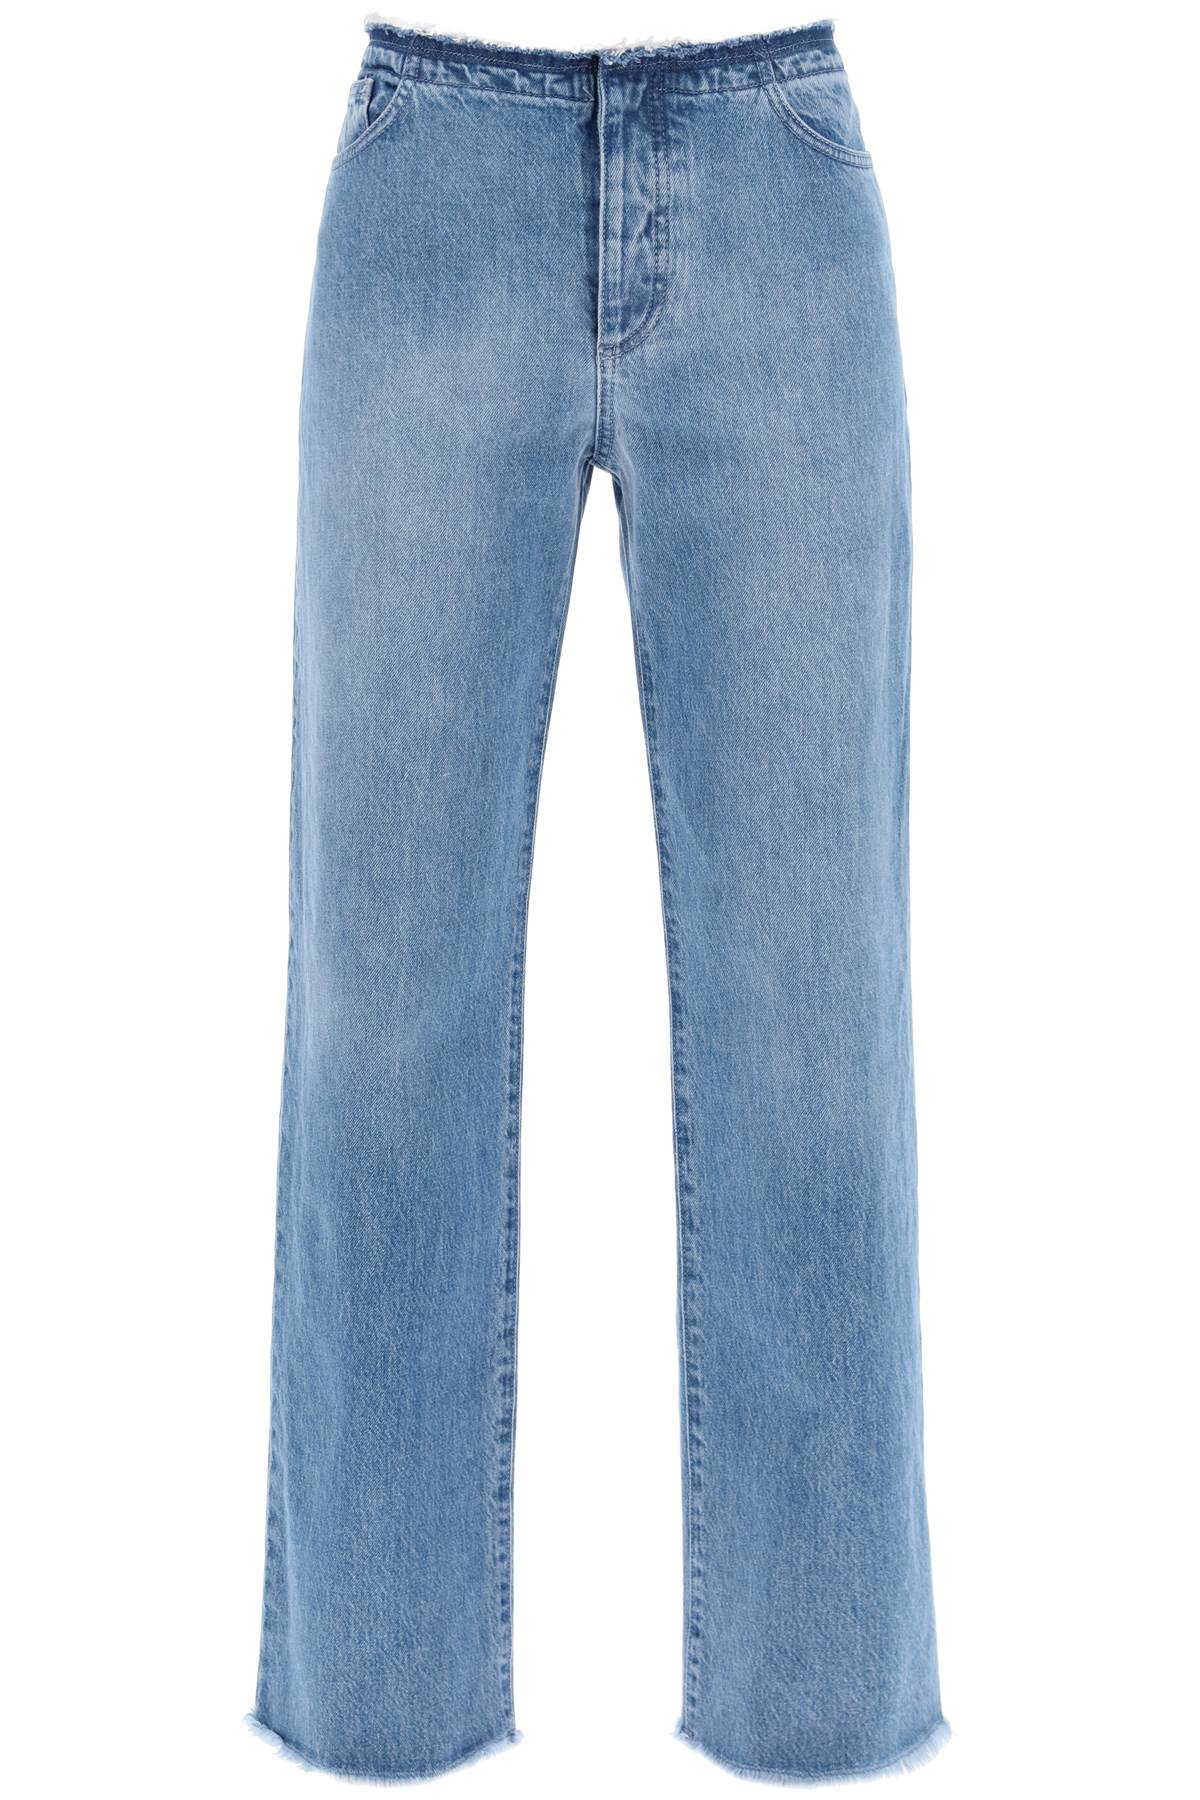 Mvp wardrobe straight leg levant jeans with a-0